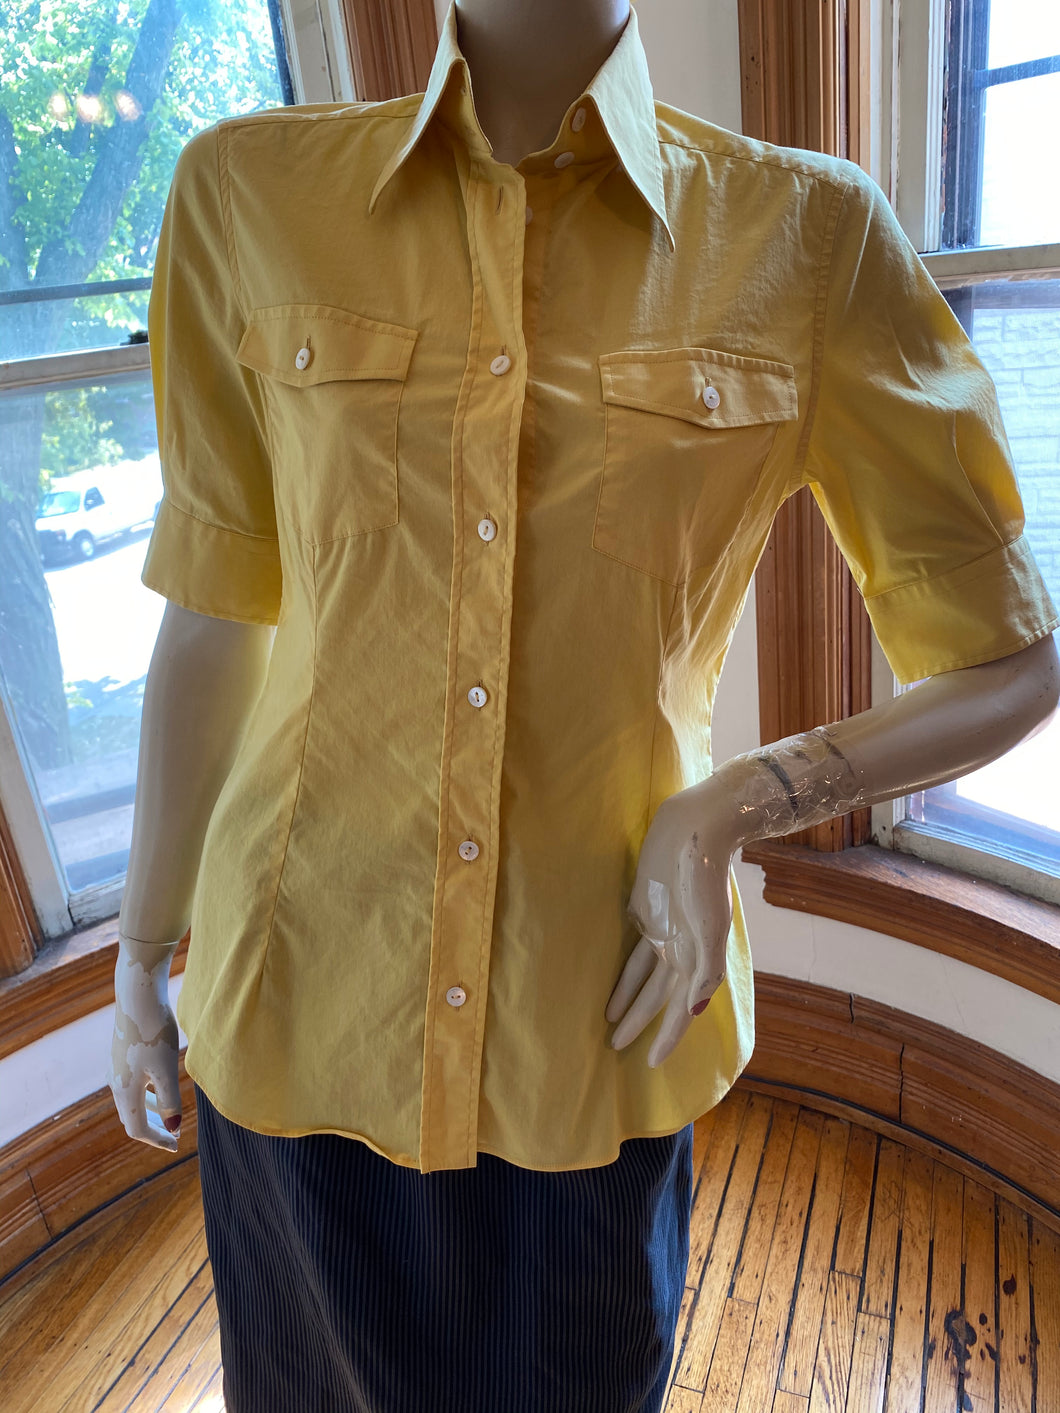 Dolce & Gabbana Yellow Cotton Button Front Top, size M (Italian size 44)